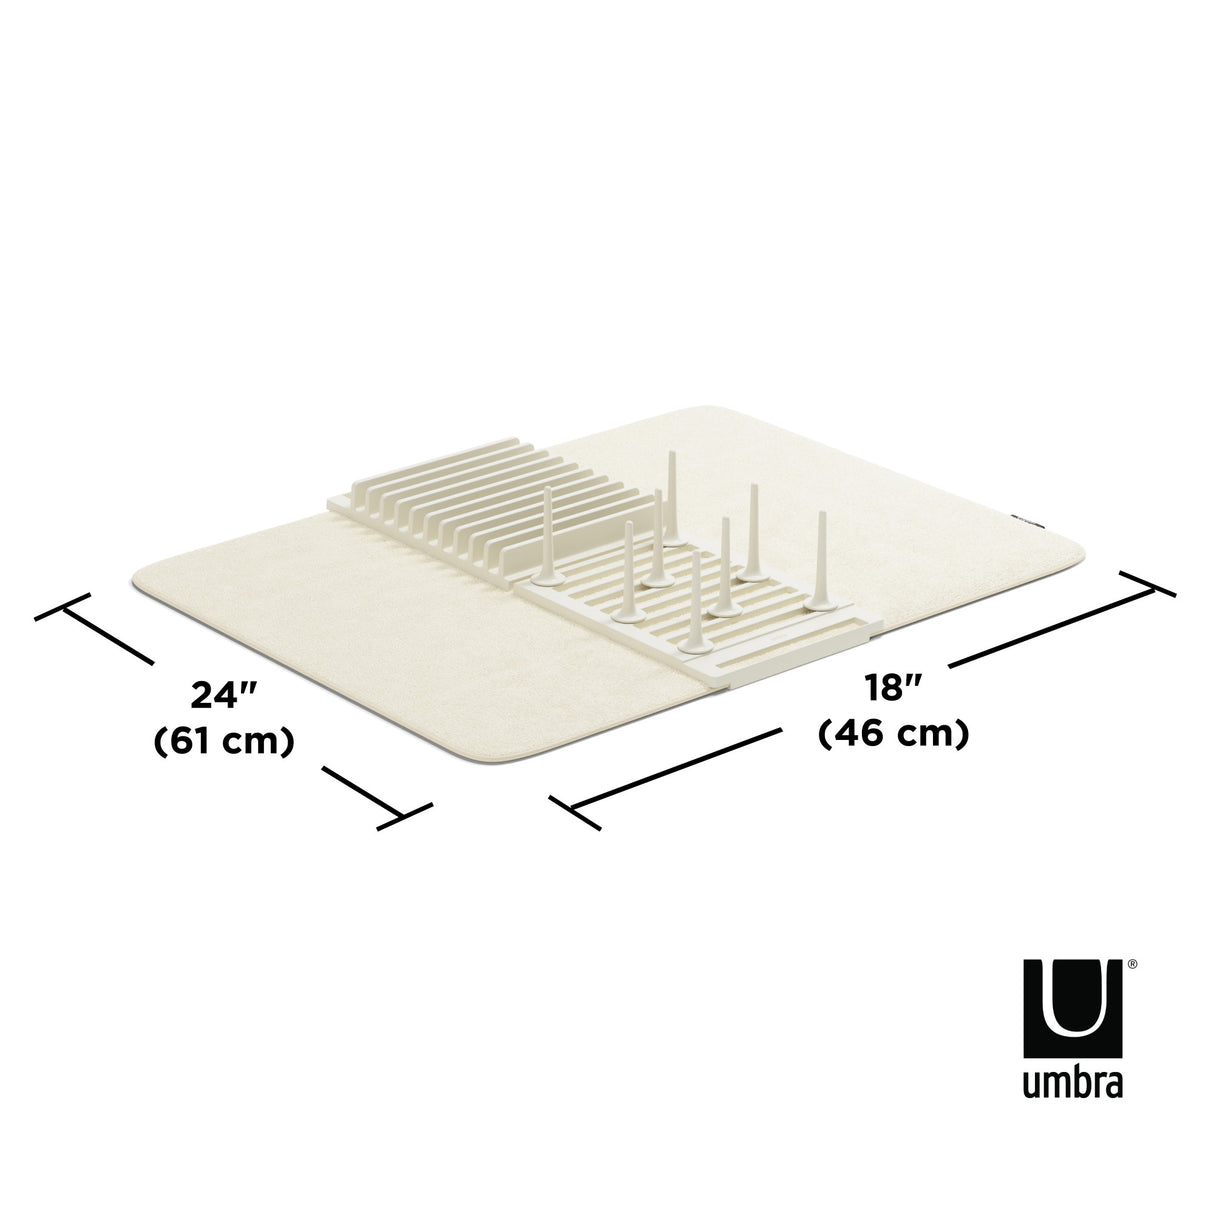 Umbra UDry Peg Drying Rack with Mat 